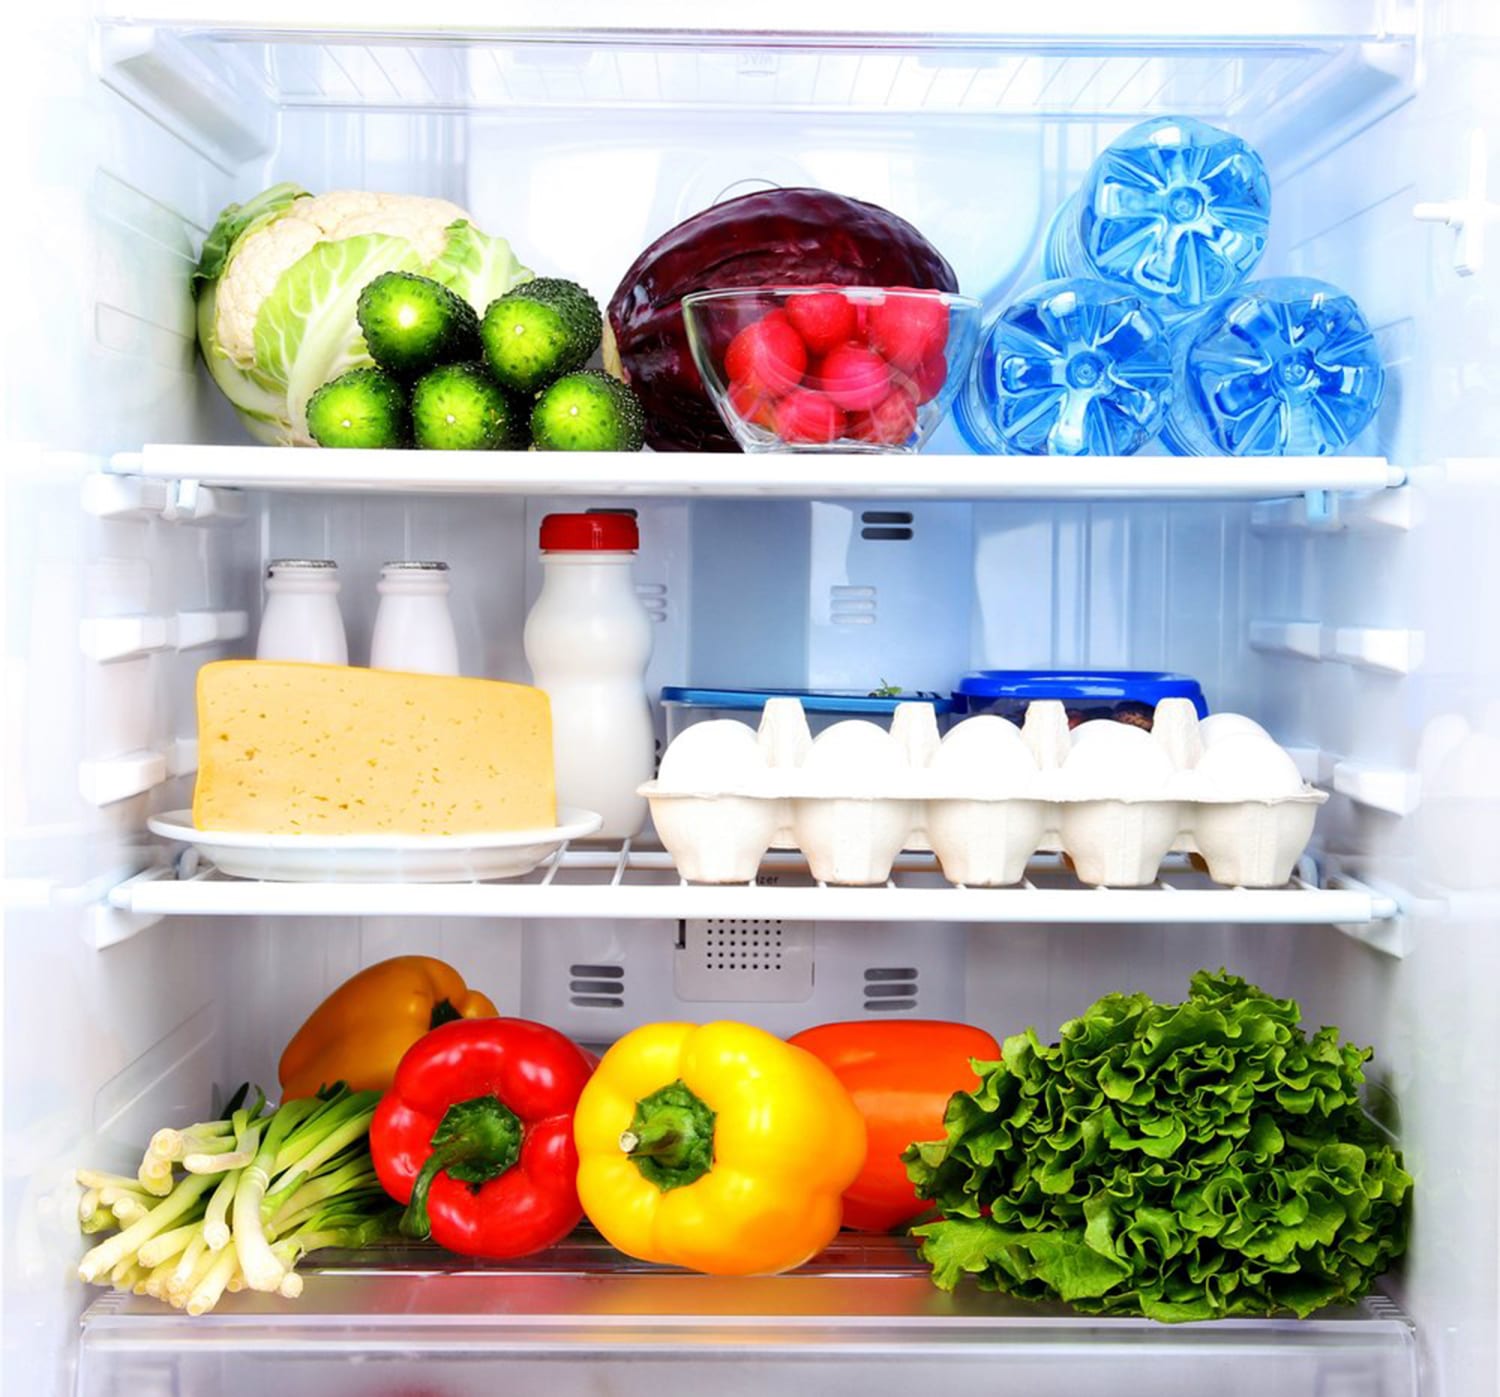 How does a refrigerator keep food cold?